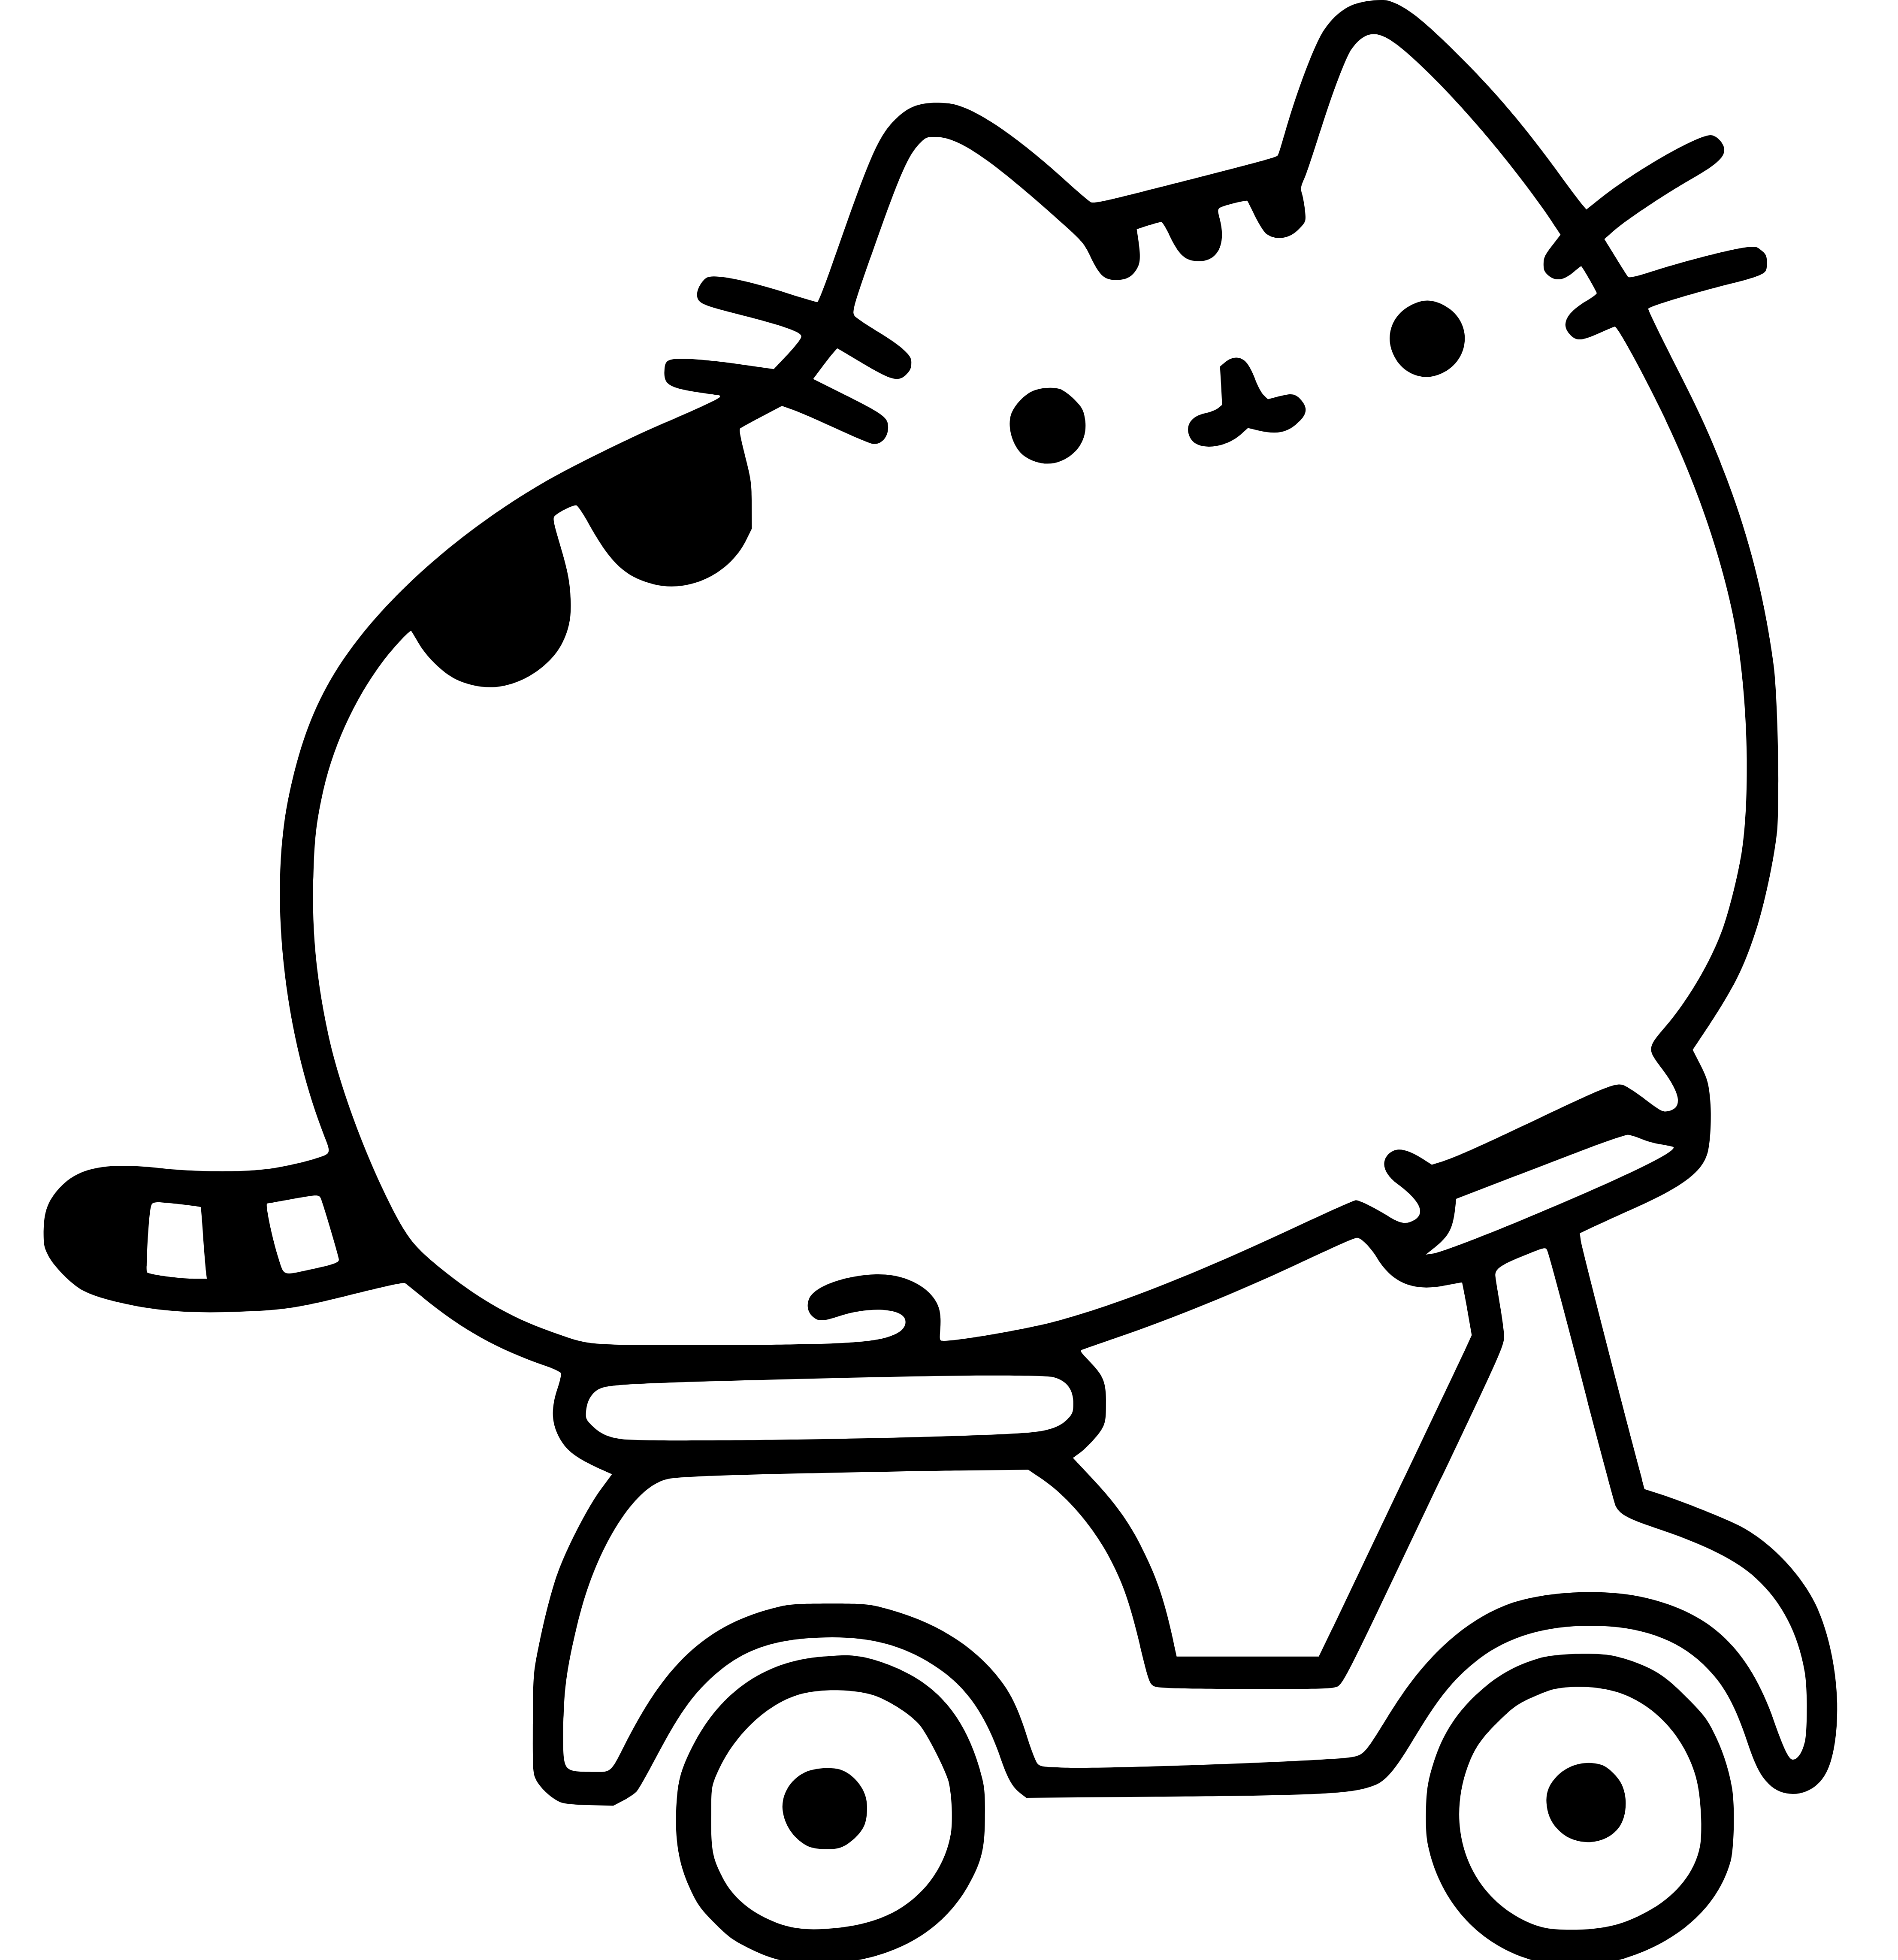 Pusheen coloring pages simple and easy for kids - SheetalColor.com